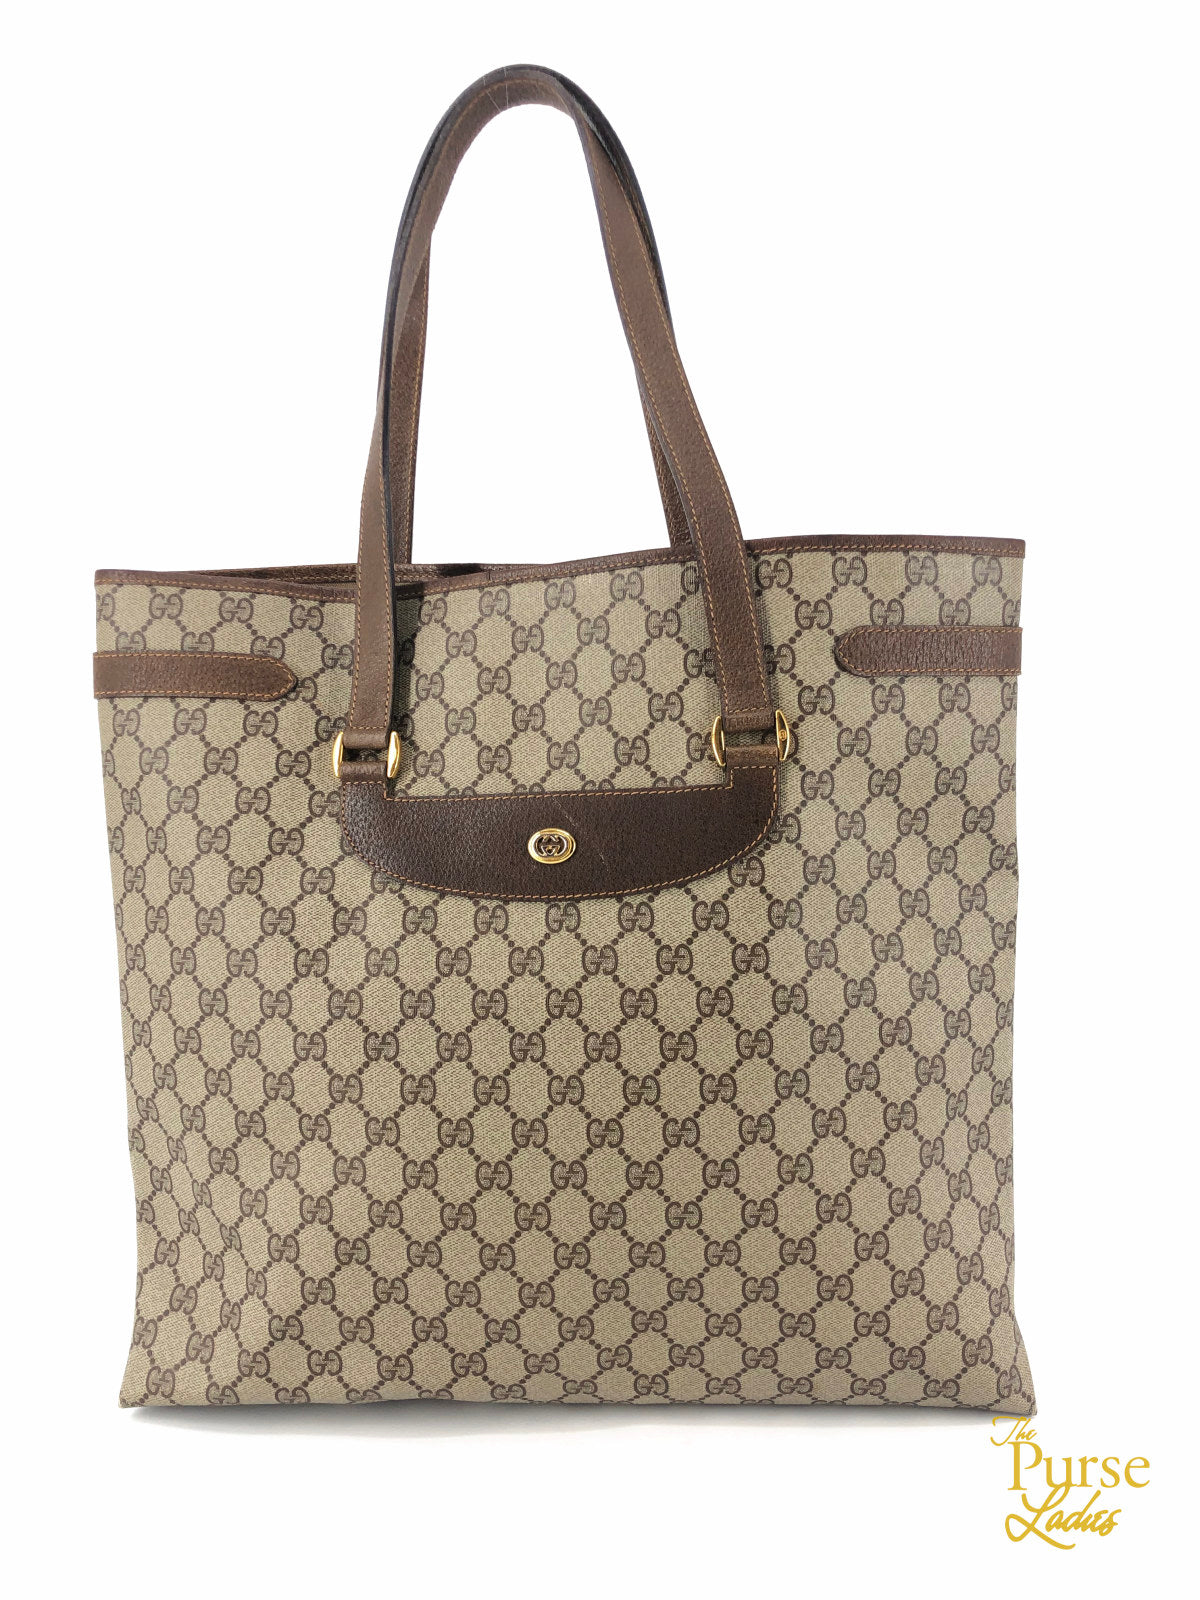 Authentic Gucci Bags, Shoes and Accessories – The Purse Ladies